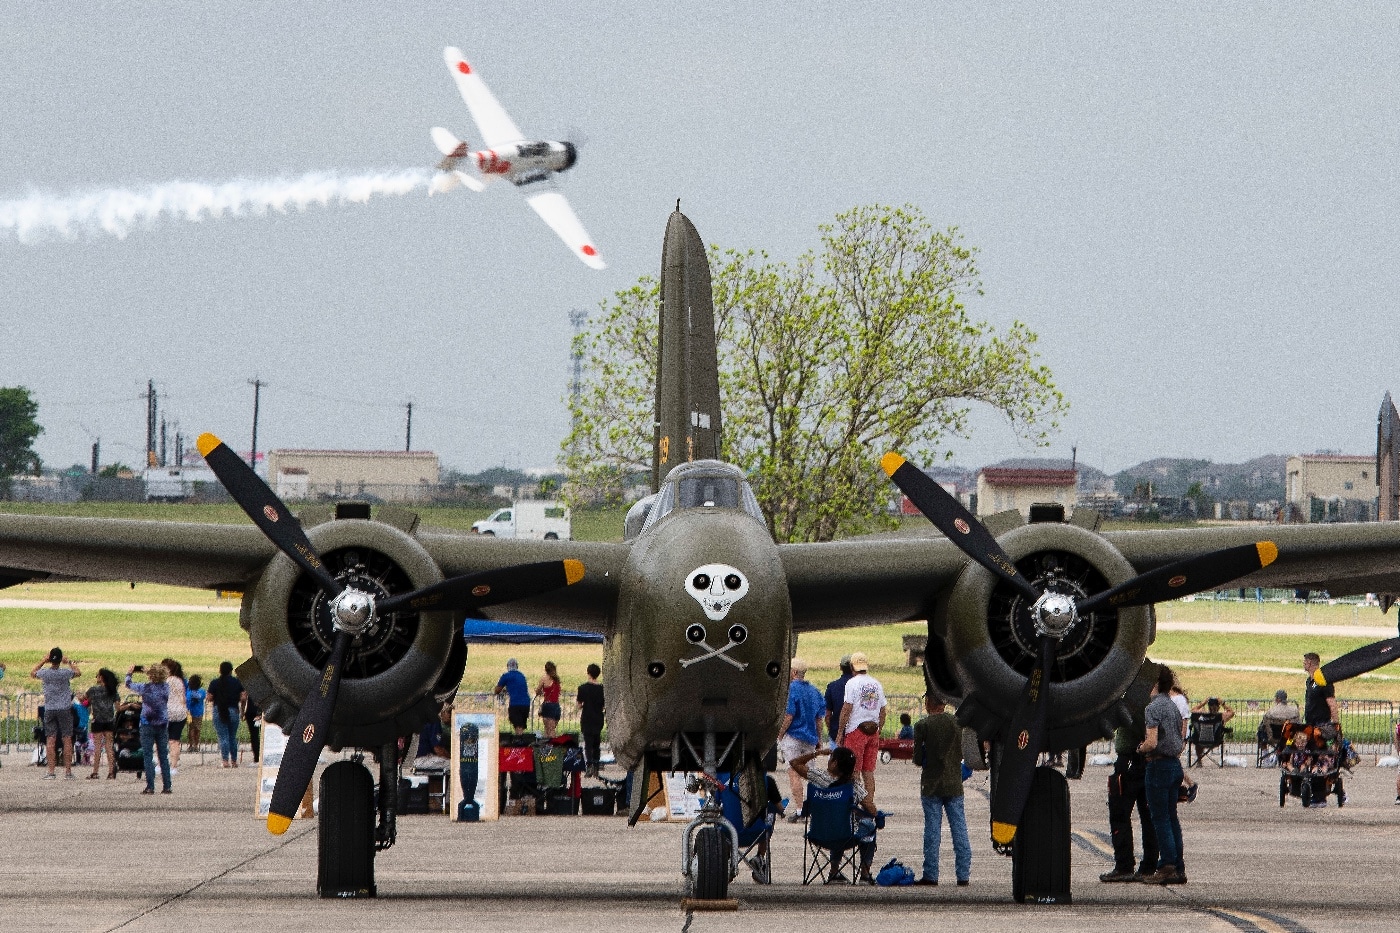 Shown here is an A-20 Havoc on the flight line of The Great Texas Airshow on Apr. 23, 2022, at Joint Base San Antonio-Randolph. The U.S. Air Force is celebrating its 75th anniversary with The Great Texas Airshow as a key event. 